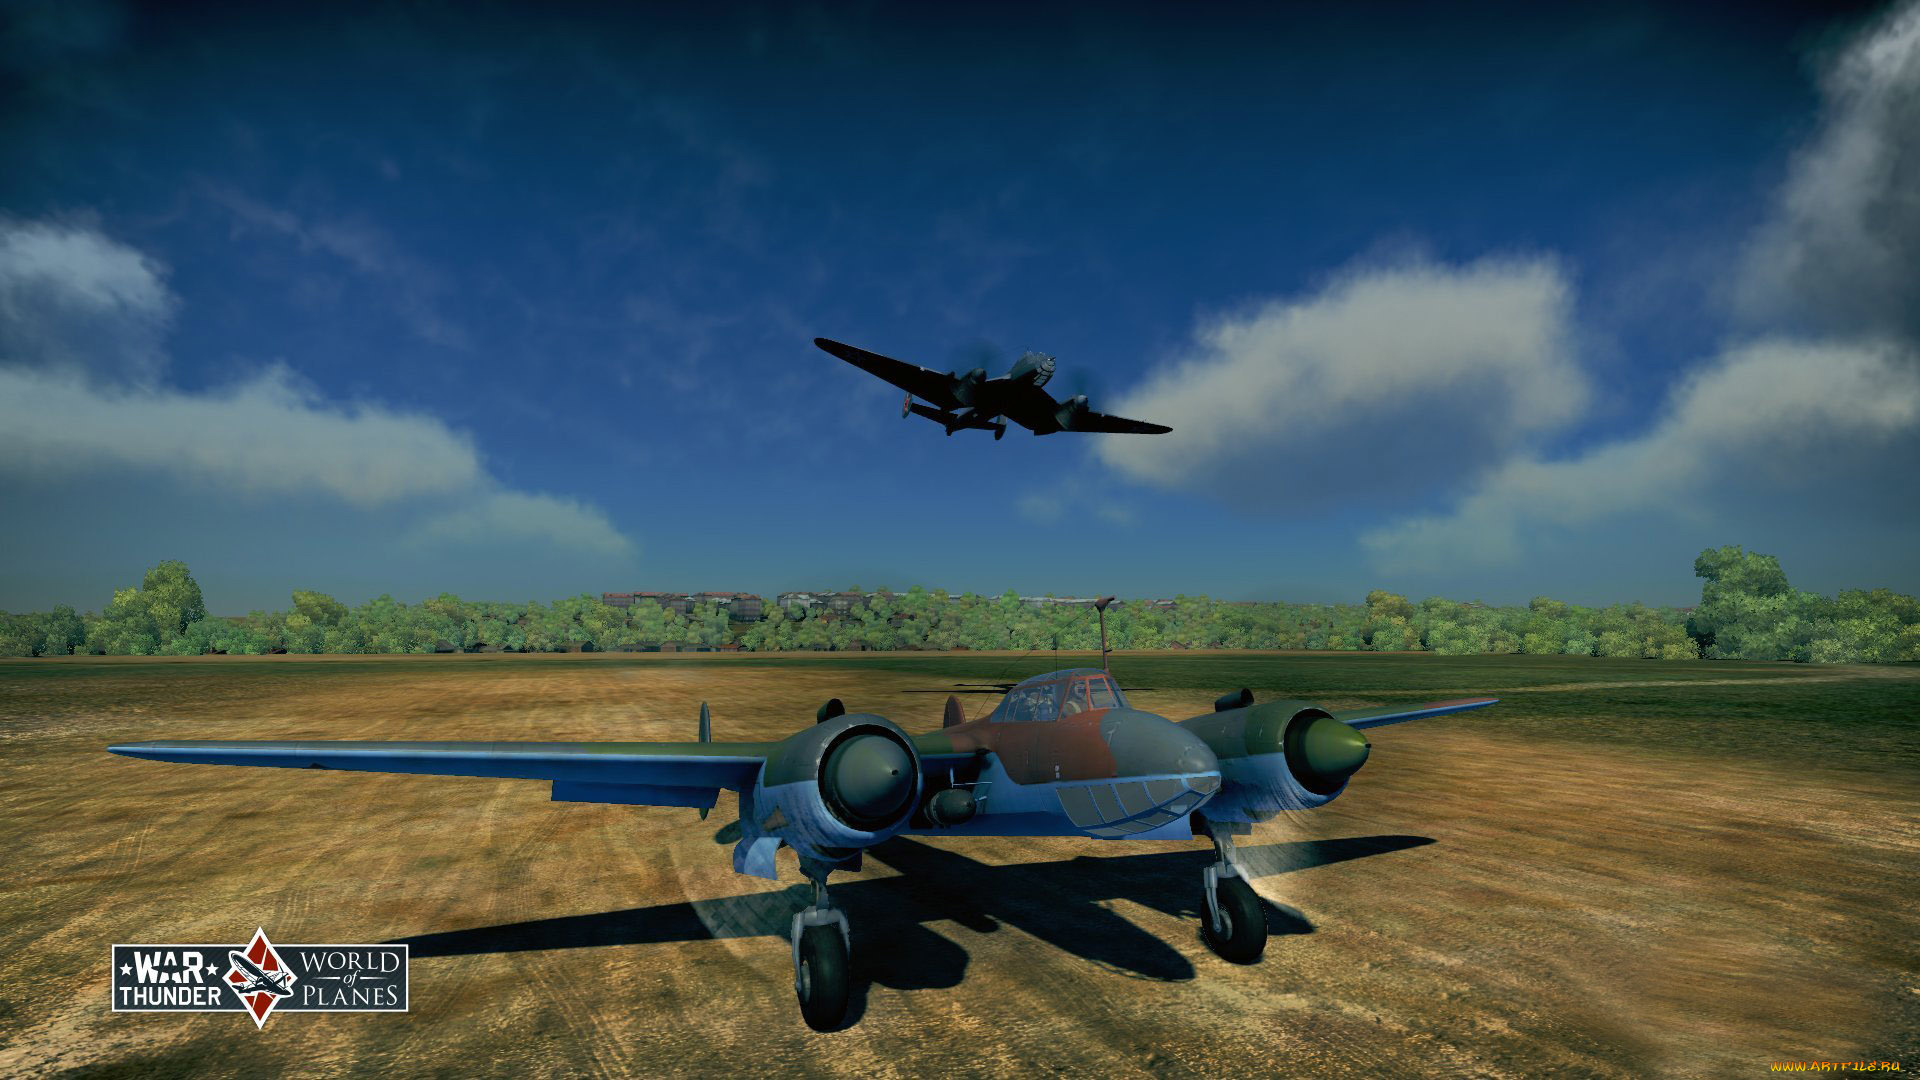 World of war thunder download torrent dreaming out loud one republic album torrent